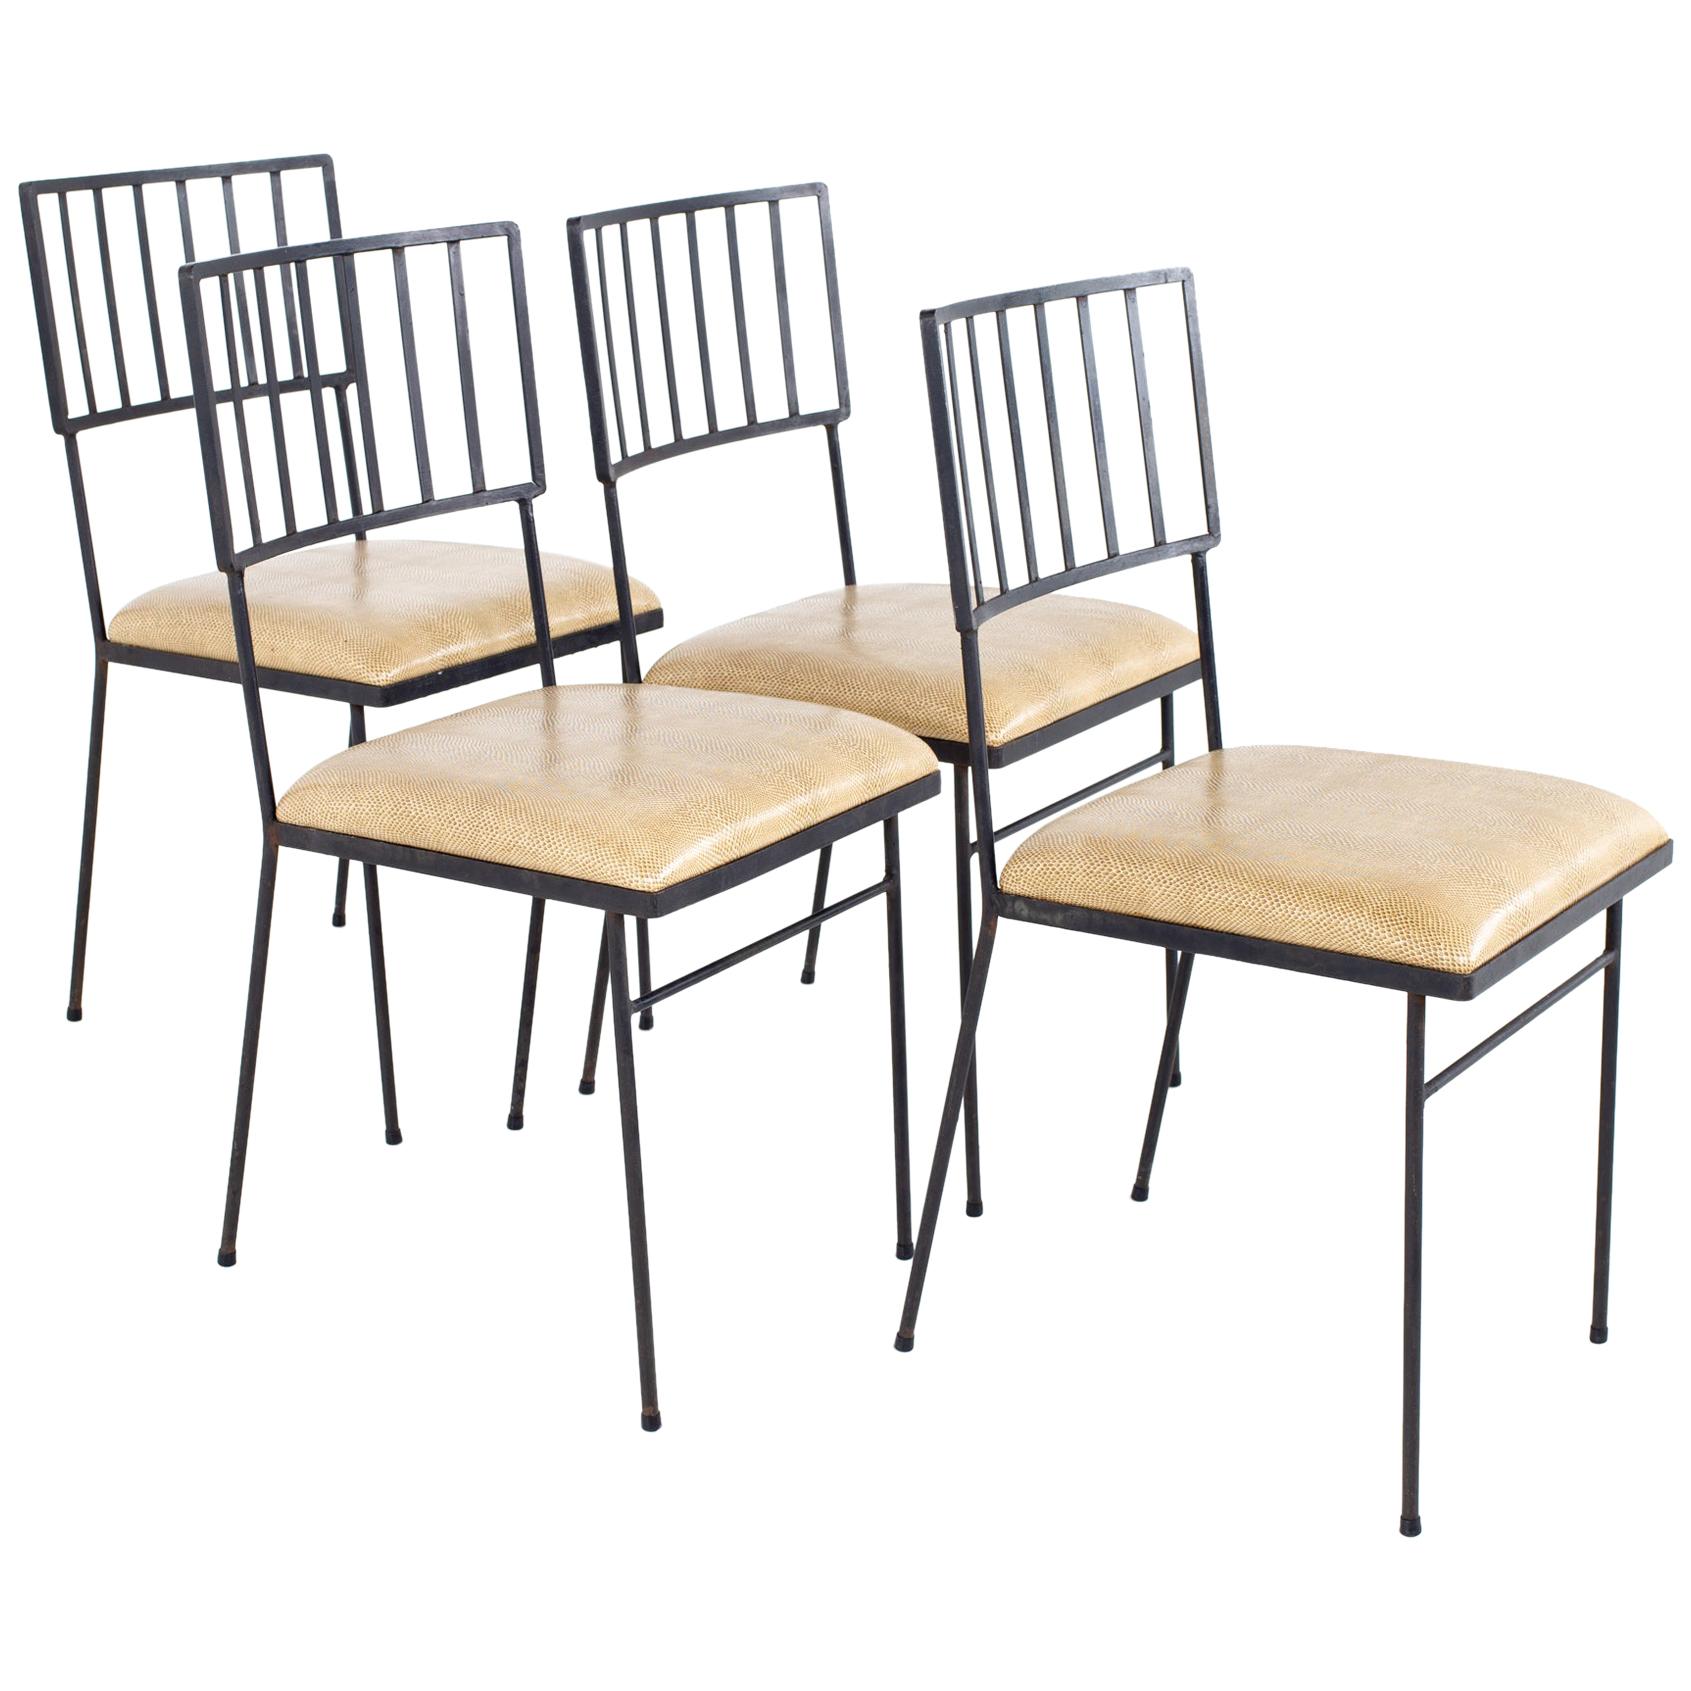 Milo Baughman For Pacific Iron Works Mid Century Chairs - Set of 4